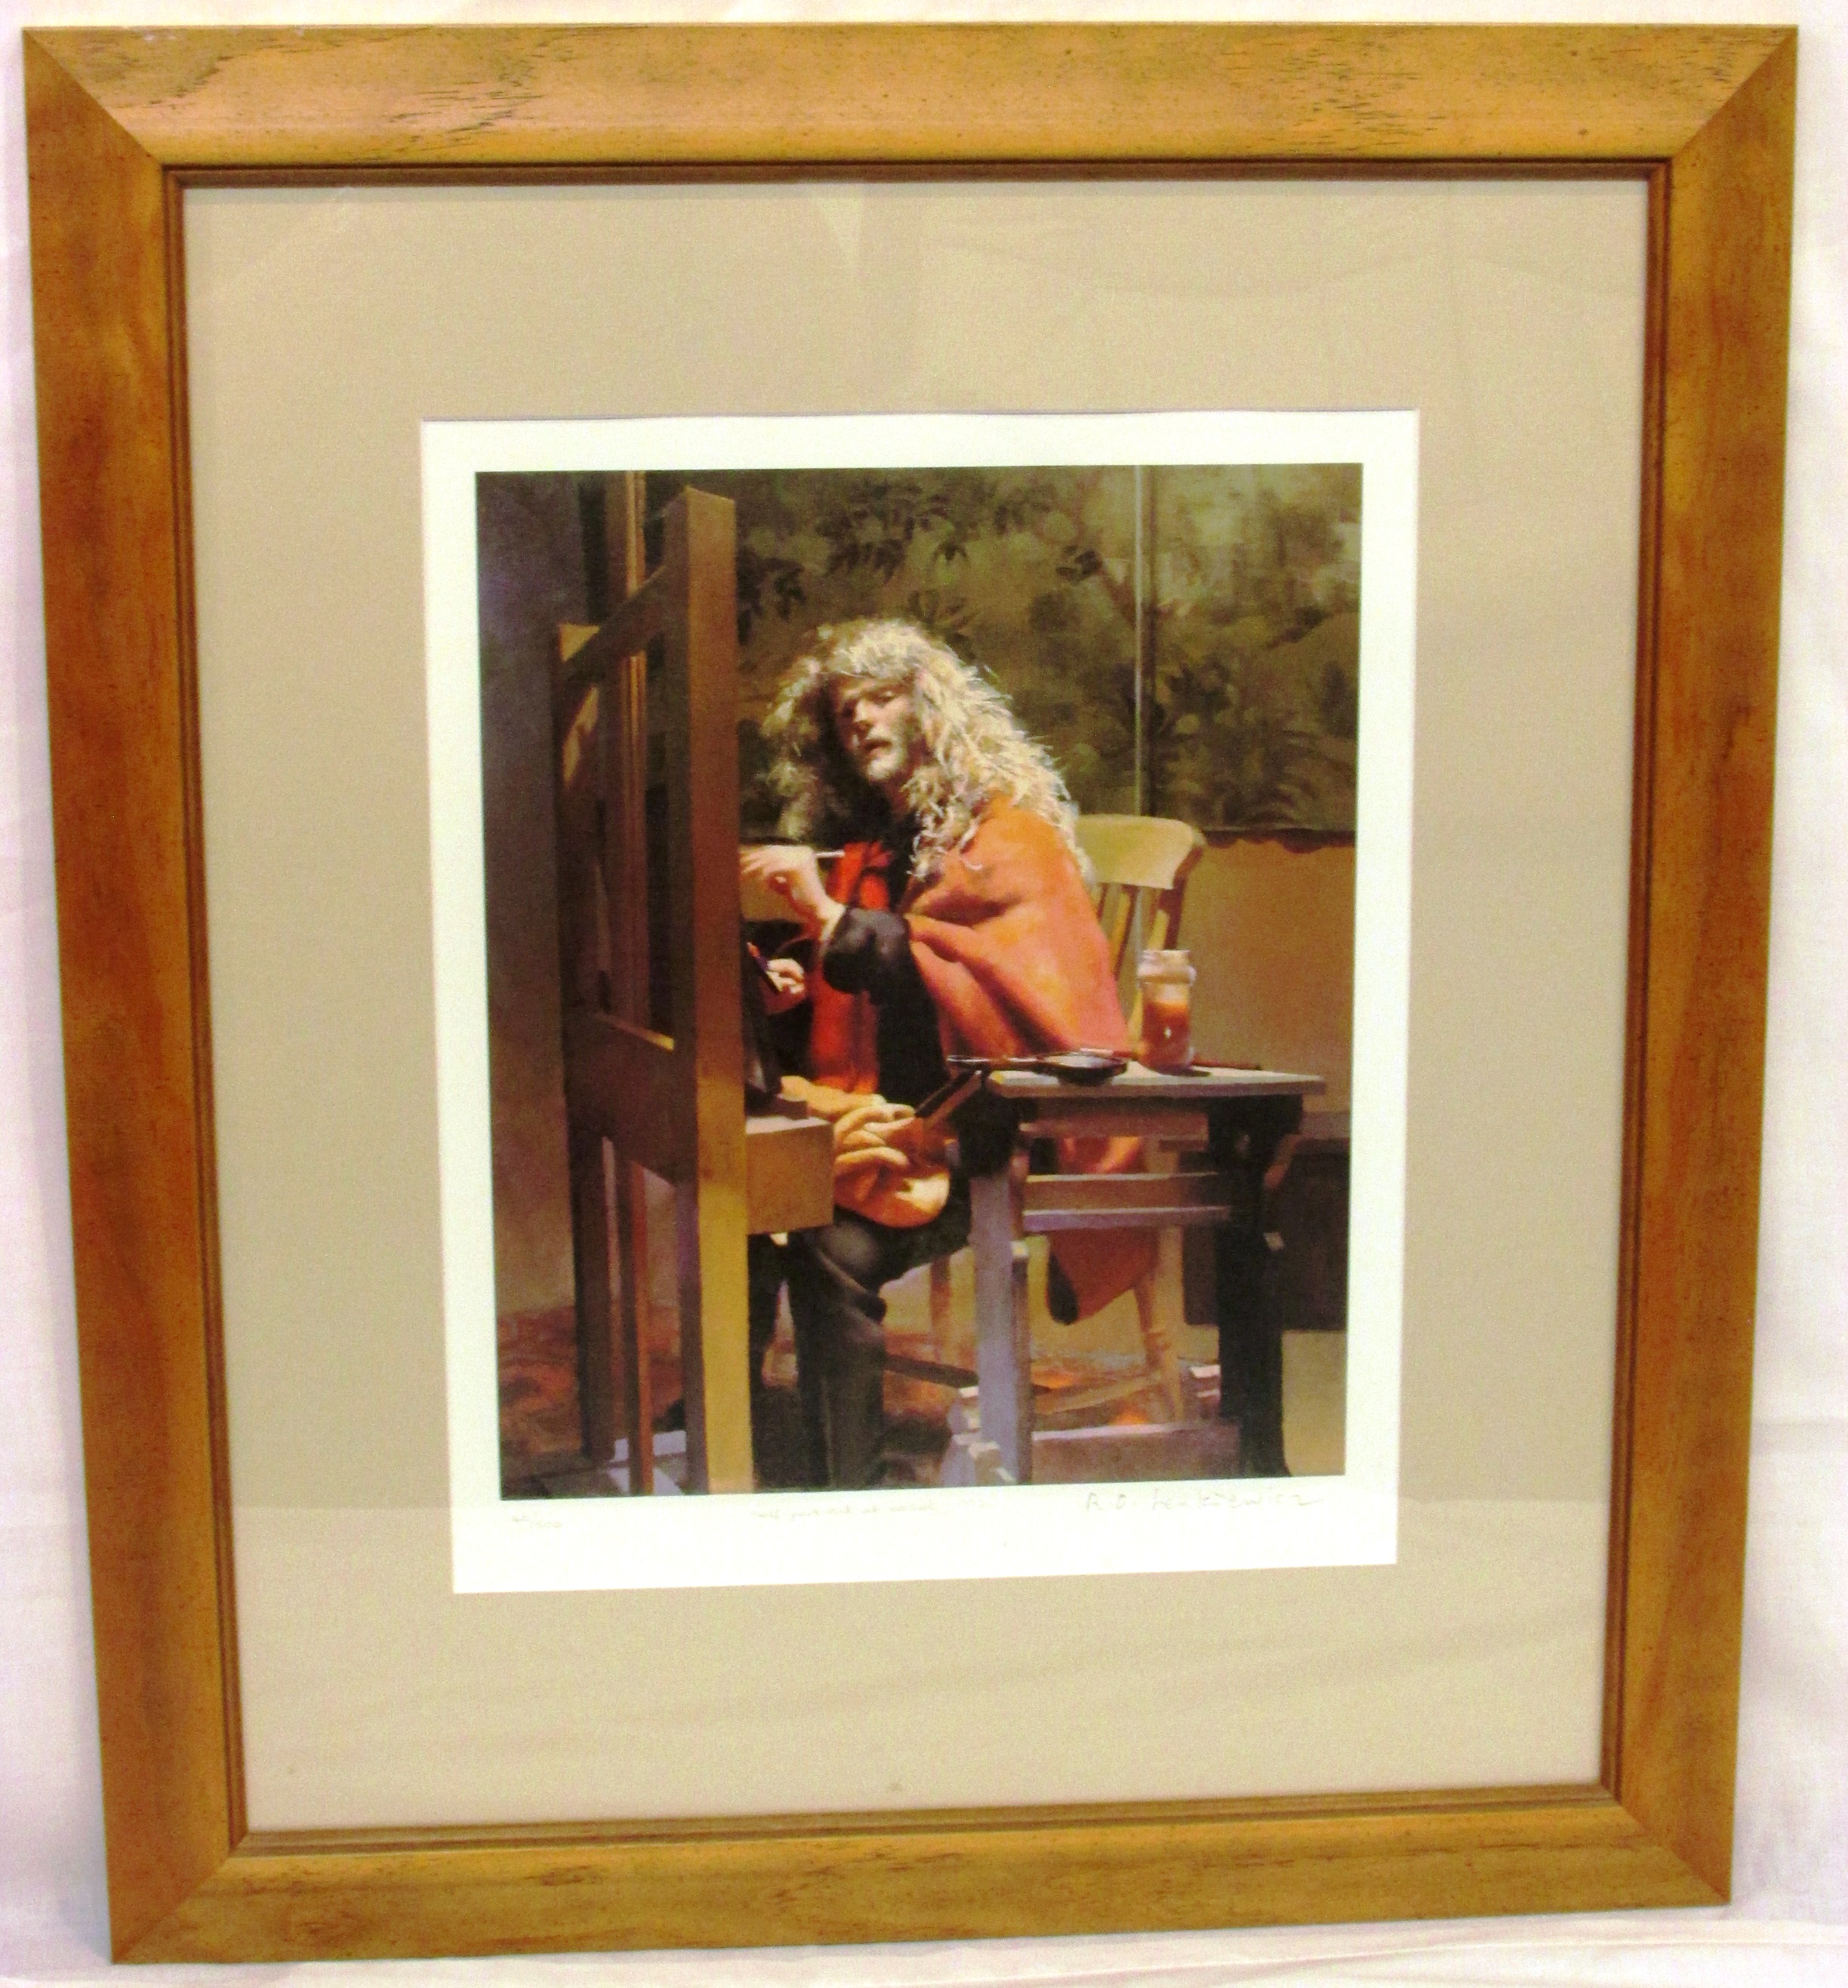 After Robert Oscar Lenkiewicz (1941-2002) - 'Self-portrait at easel -1992', limited edition - Image 3 of 6